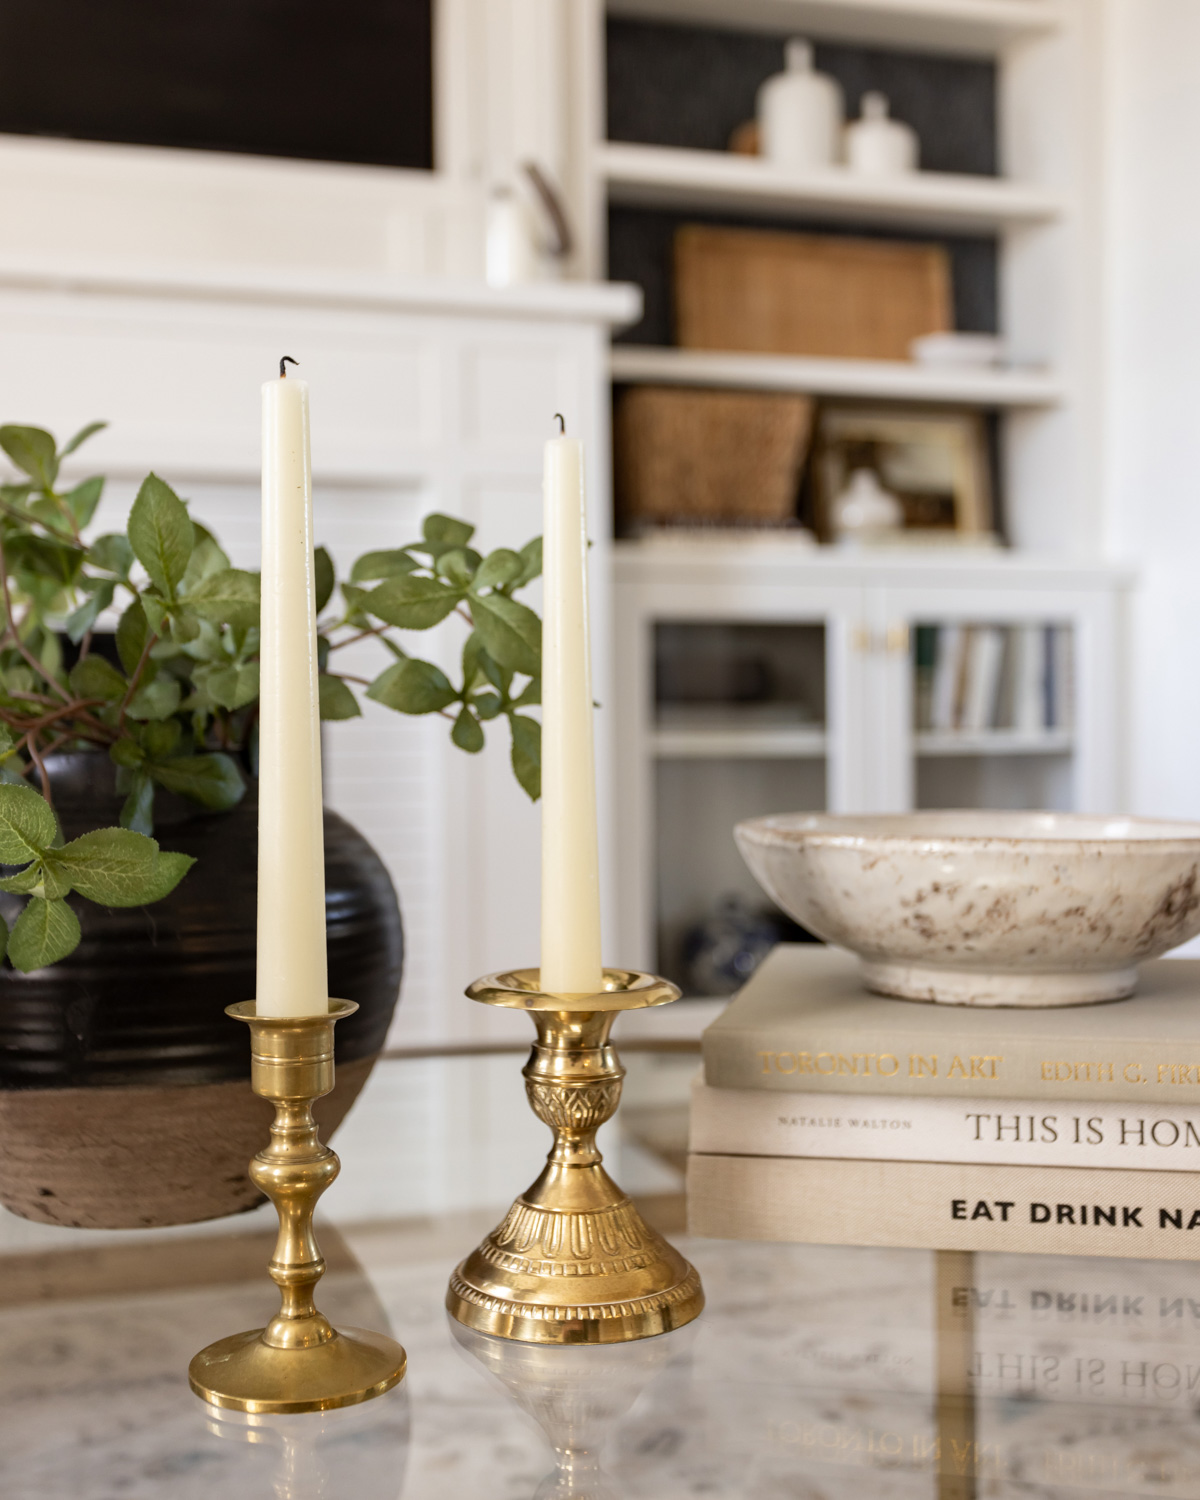 Thrift store books and candlesticks for a modern look.